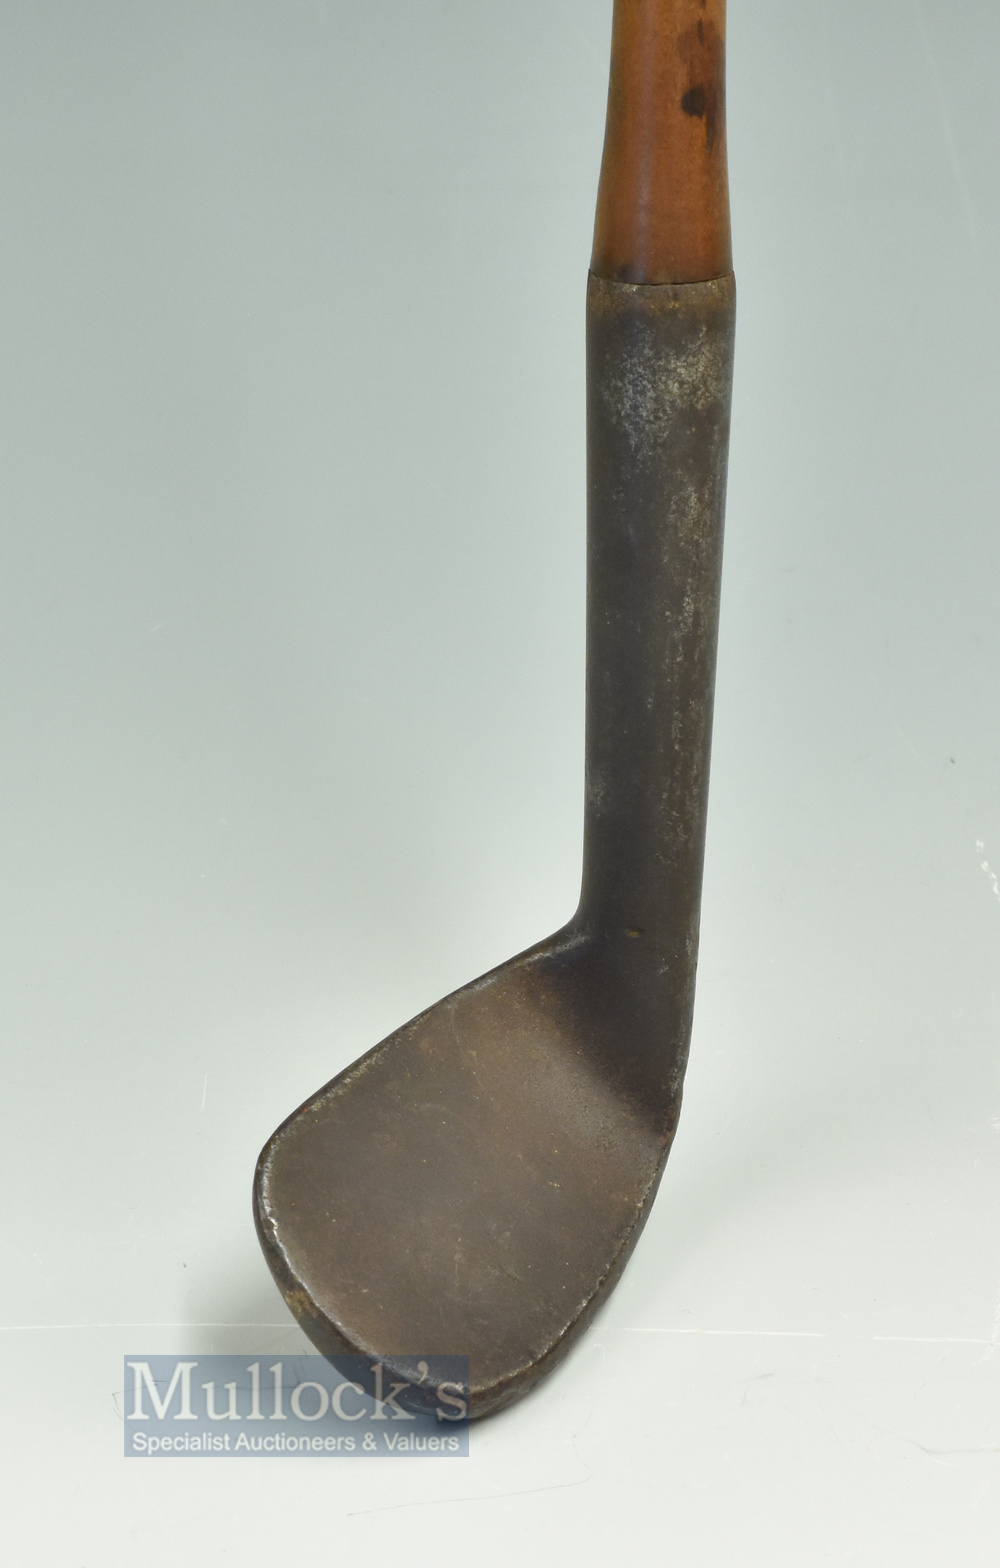 Unnamed late Rut Iron c1890 - head measures 2.7/8 x 1.75", with 4.5" hosel and lemon wood shaft - Image 2 of 2